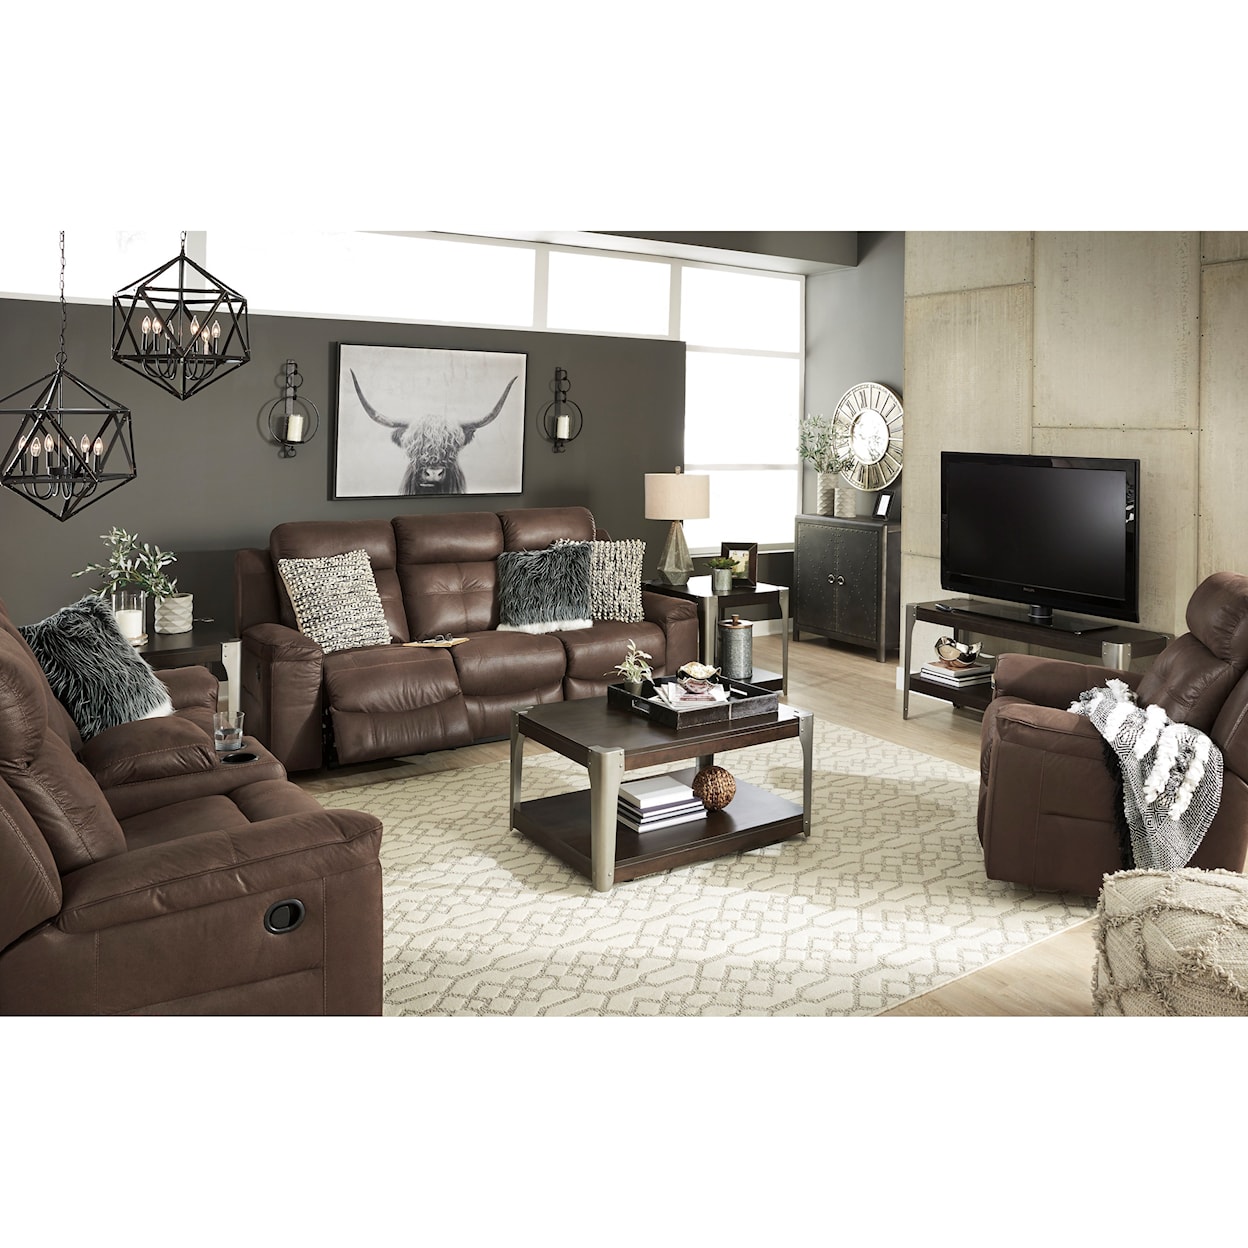 Signature Design by Ashley Jesolo Reclining Living Room Group